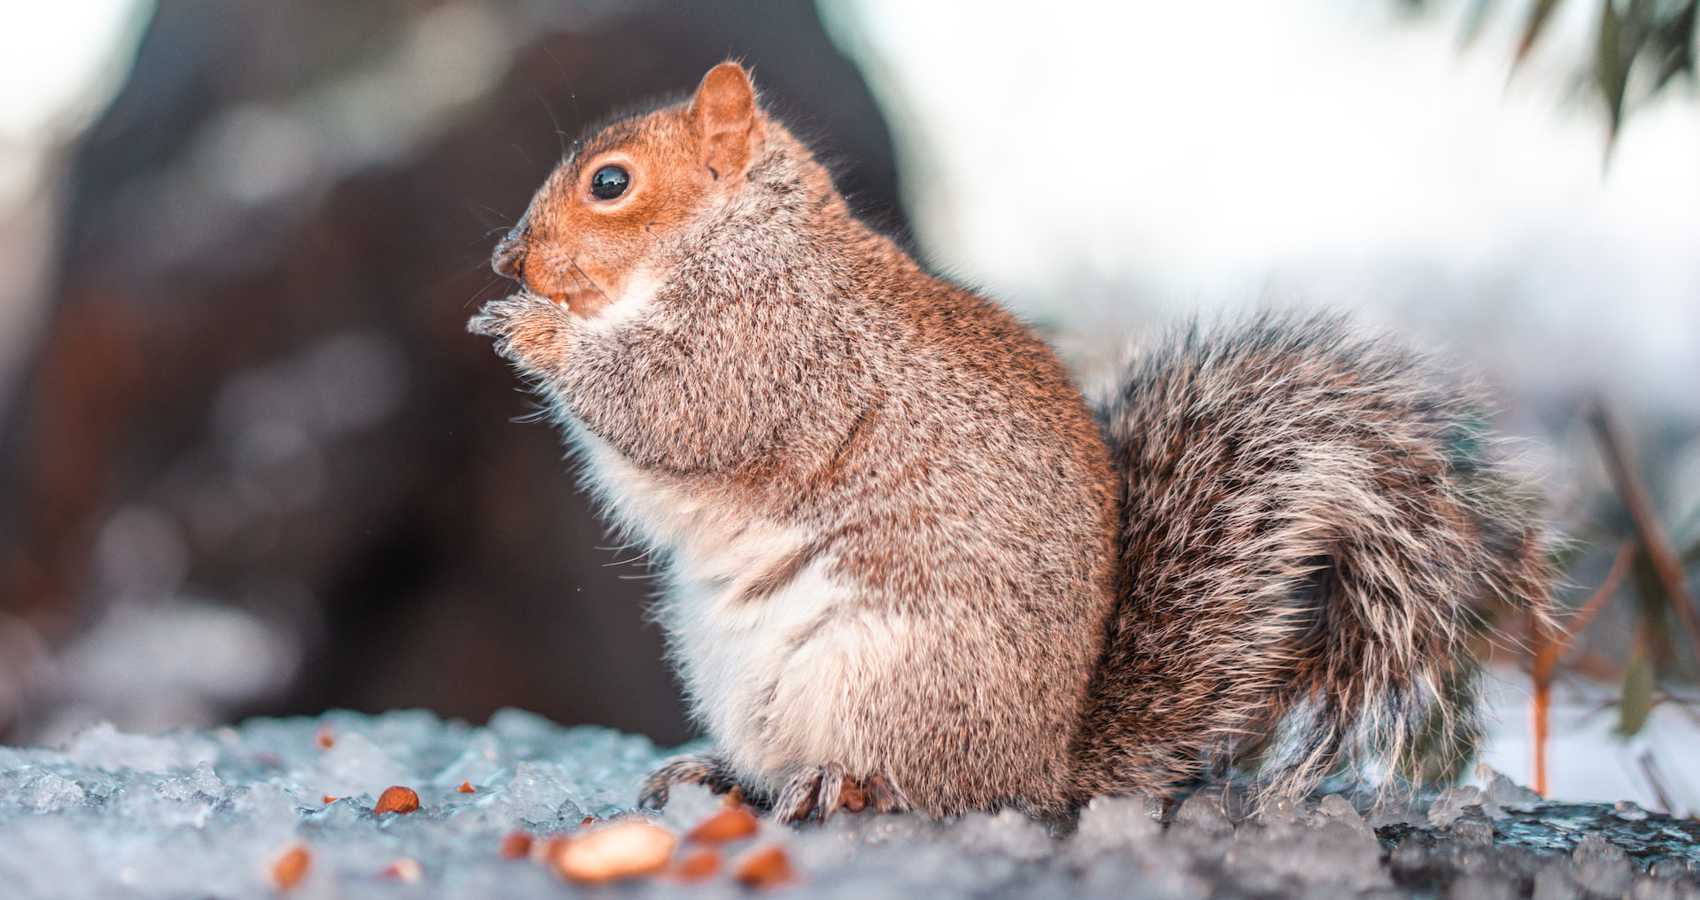 The One-Eared Squirrel, a haiku by J. D. Nelson at Spillwords.com